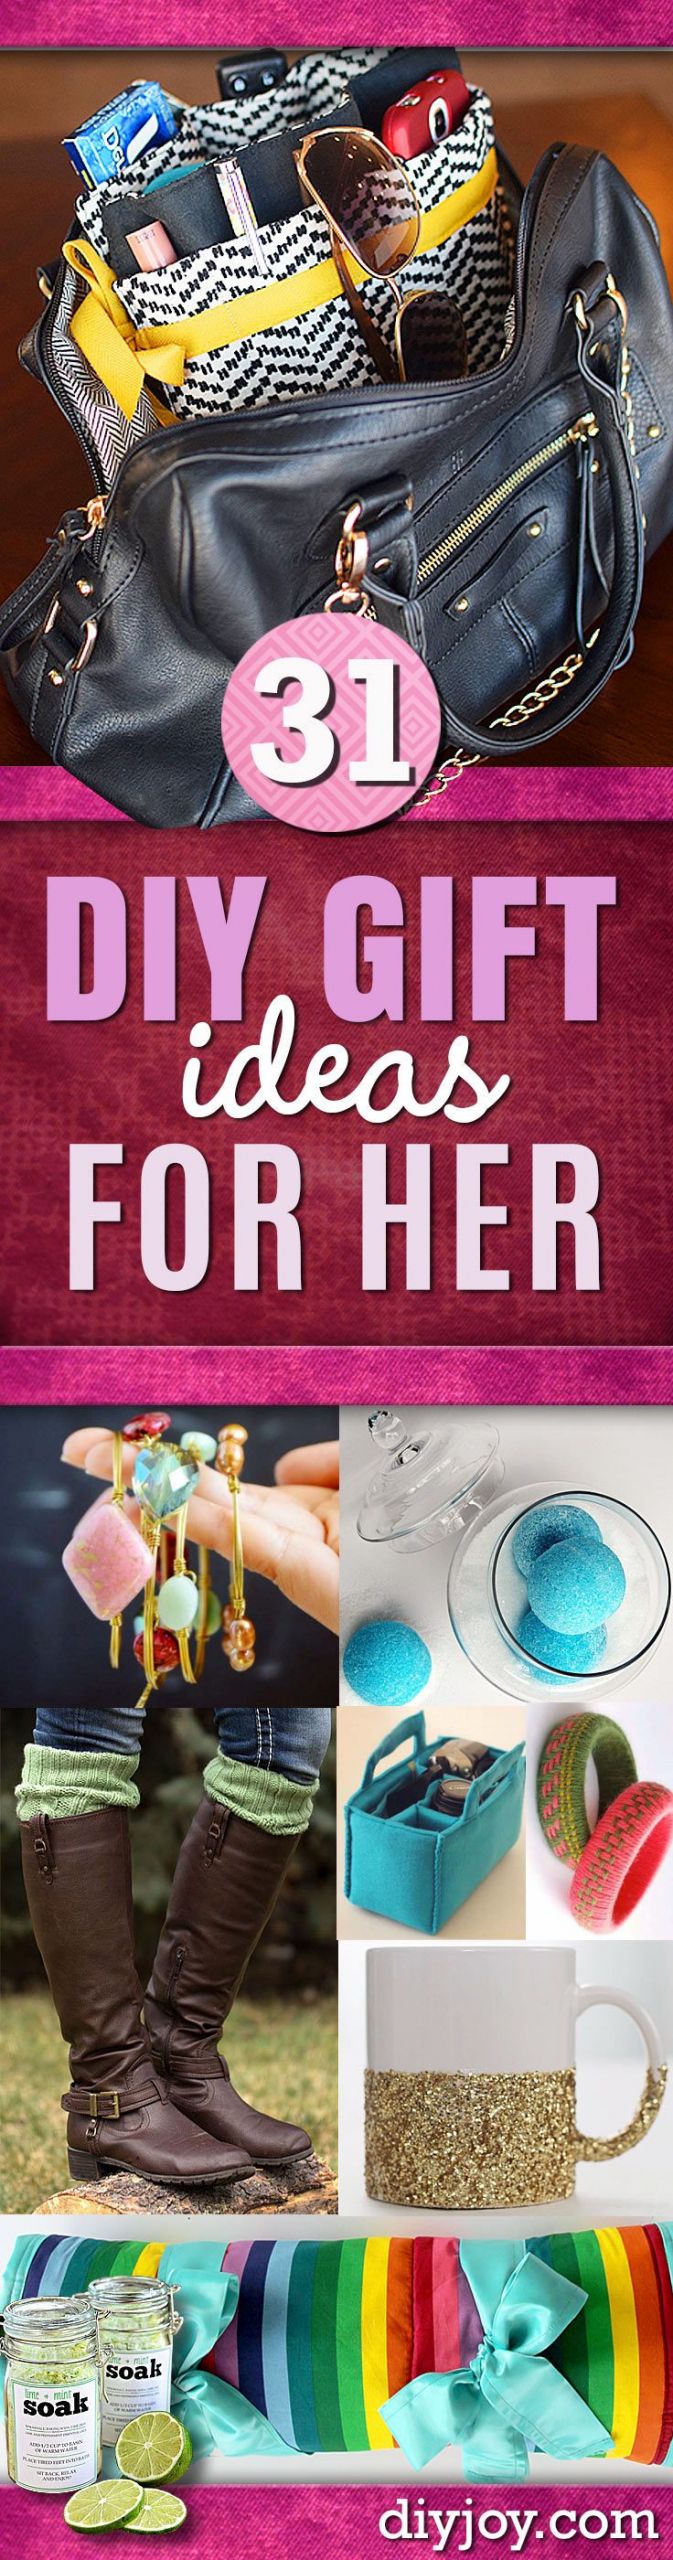 Homemade Gift Ideas For Girlfriend
 Super Special DIY Gift Ideas for Her DIY JOY